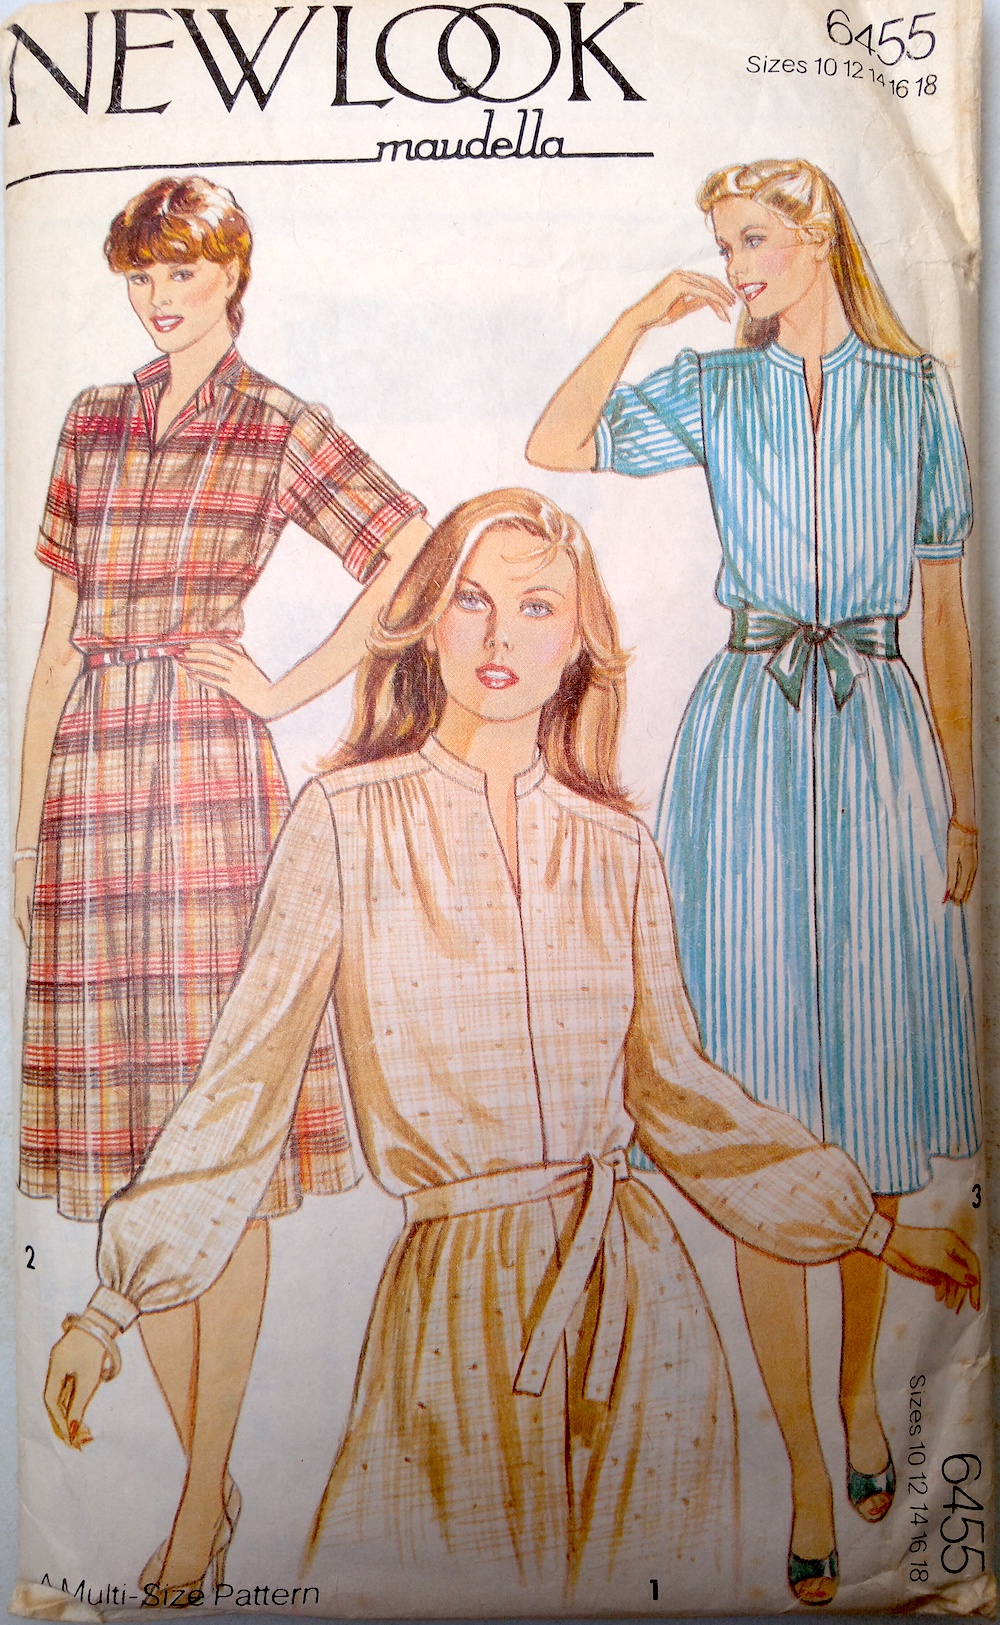 New Look Sewing Pattern 6507 – Remnant House Fabric